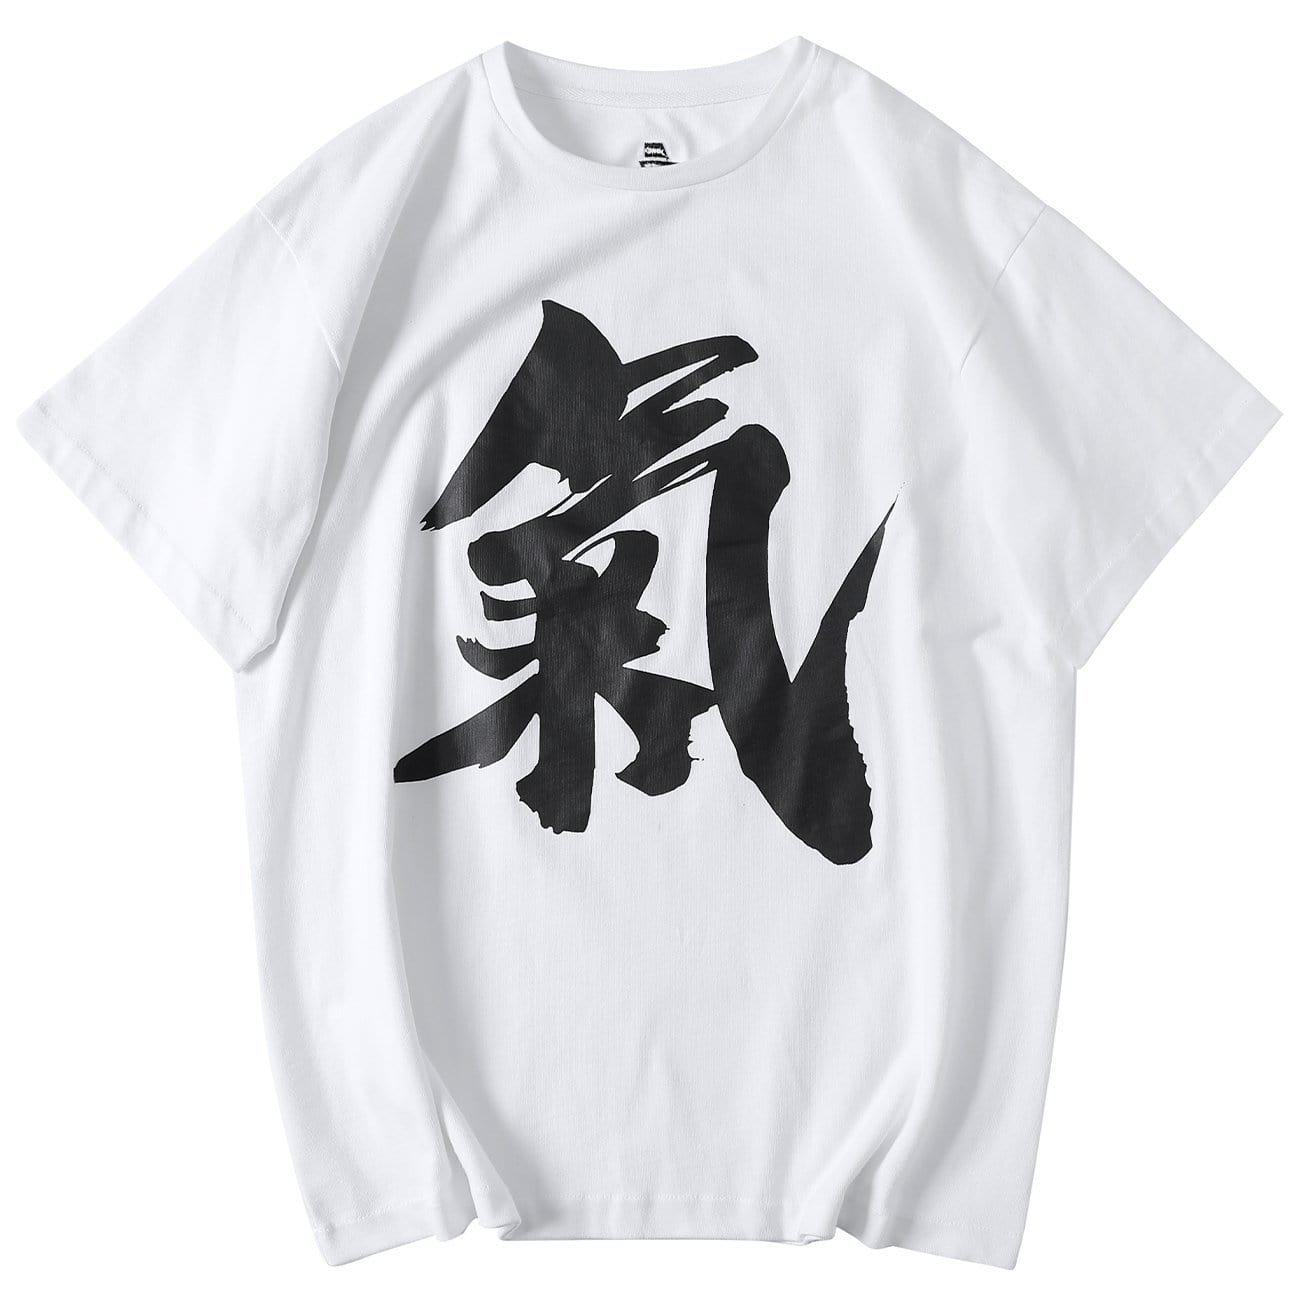 Functional Chinese Printed T-Shirt